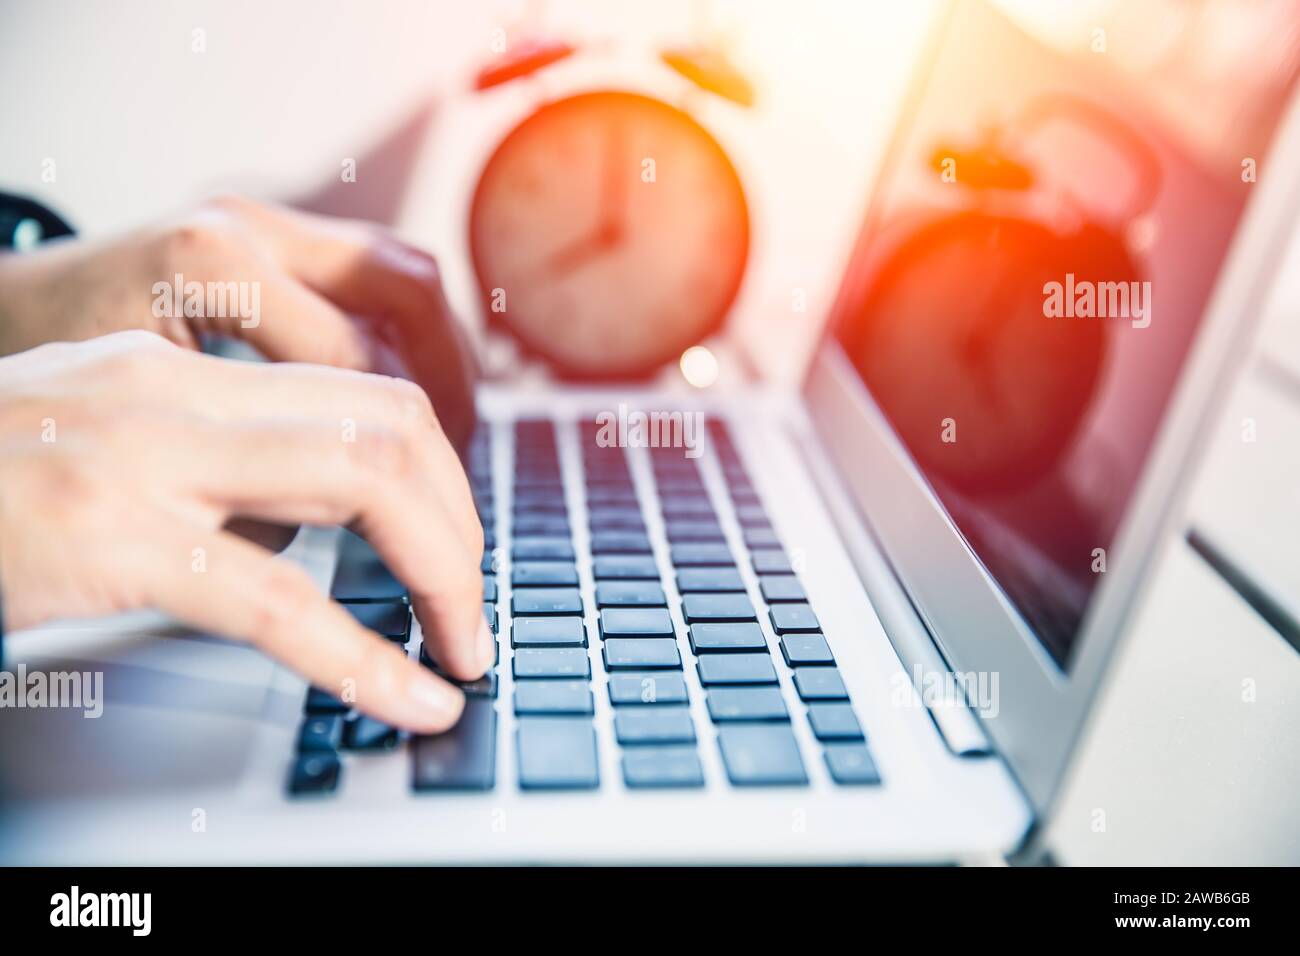 Closeup Hand Working On Laptop Computer Outdoor With Time Clock For Business Work Hours Concept Stock Photo Alamy